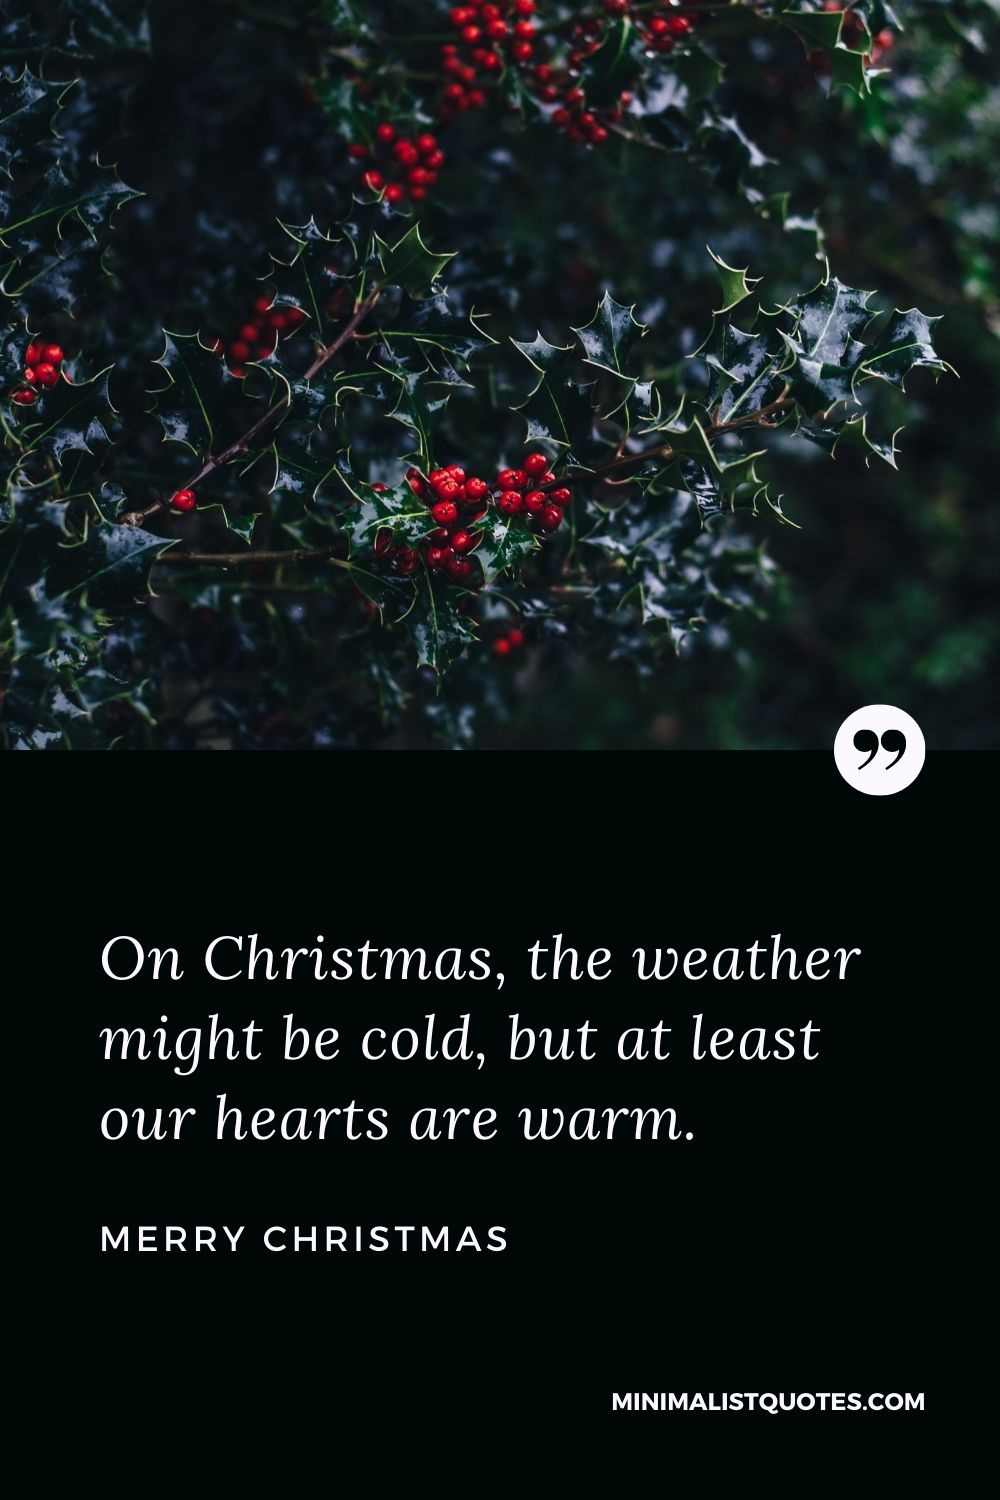 Merry Christmas Wish - On Christmas, the weather might be cold, but at least our hearts are warm.